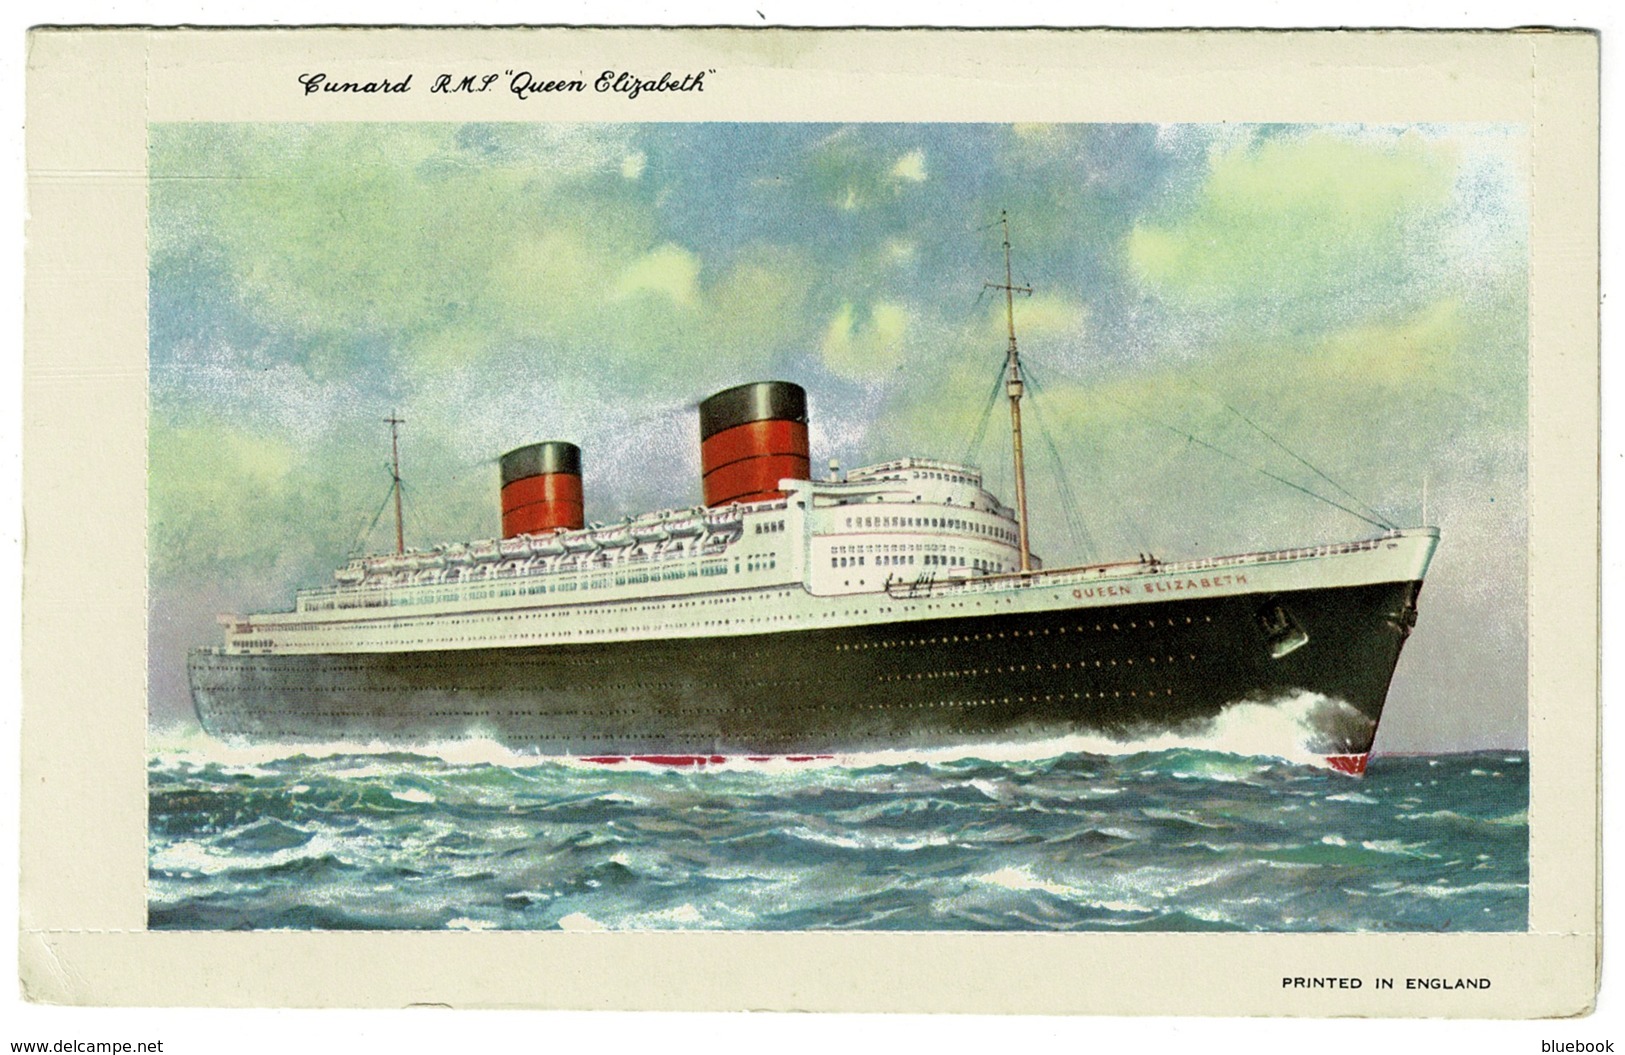 Ref 1265 - Unused Cunard R.M.S. Queen Mary Letter Card - Shipping Maritime Theme - Paquebote